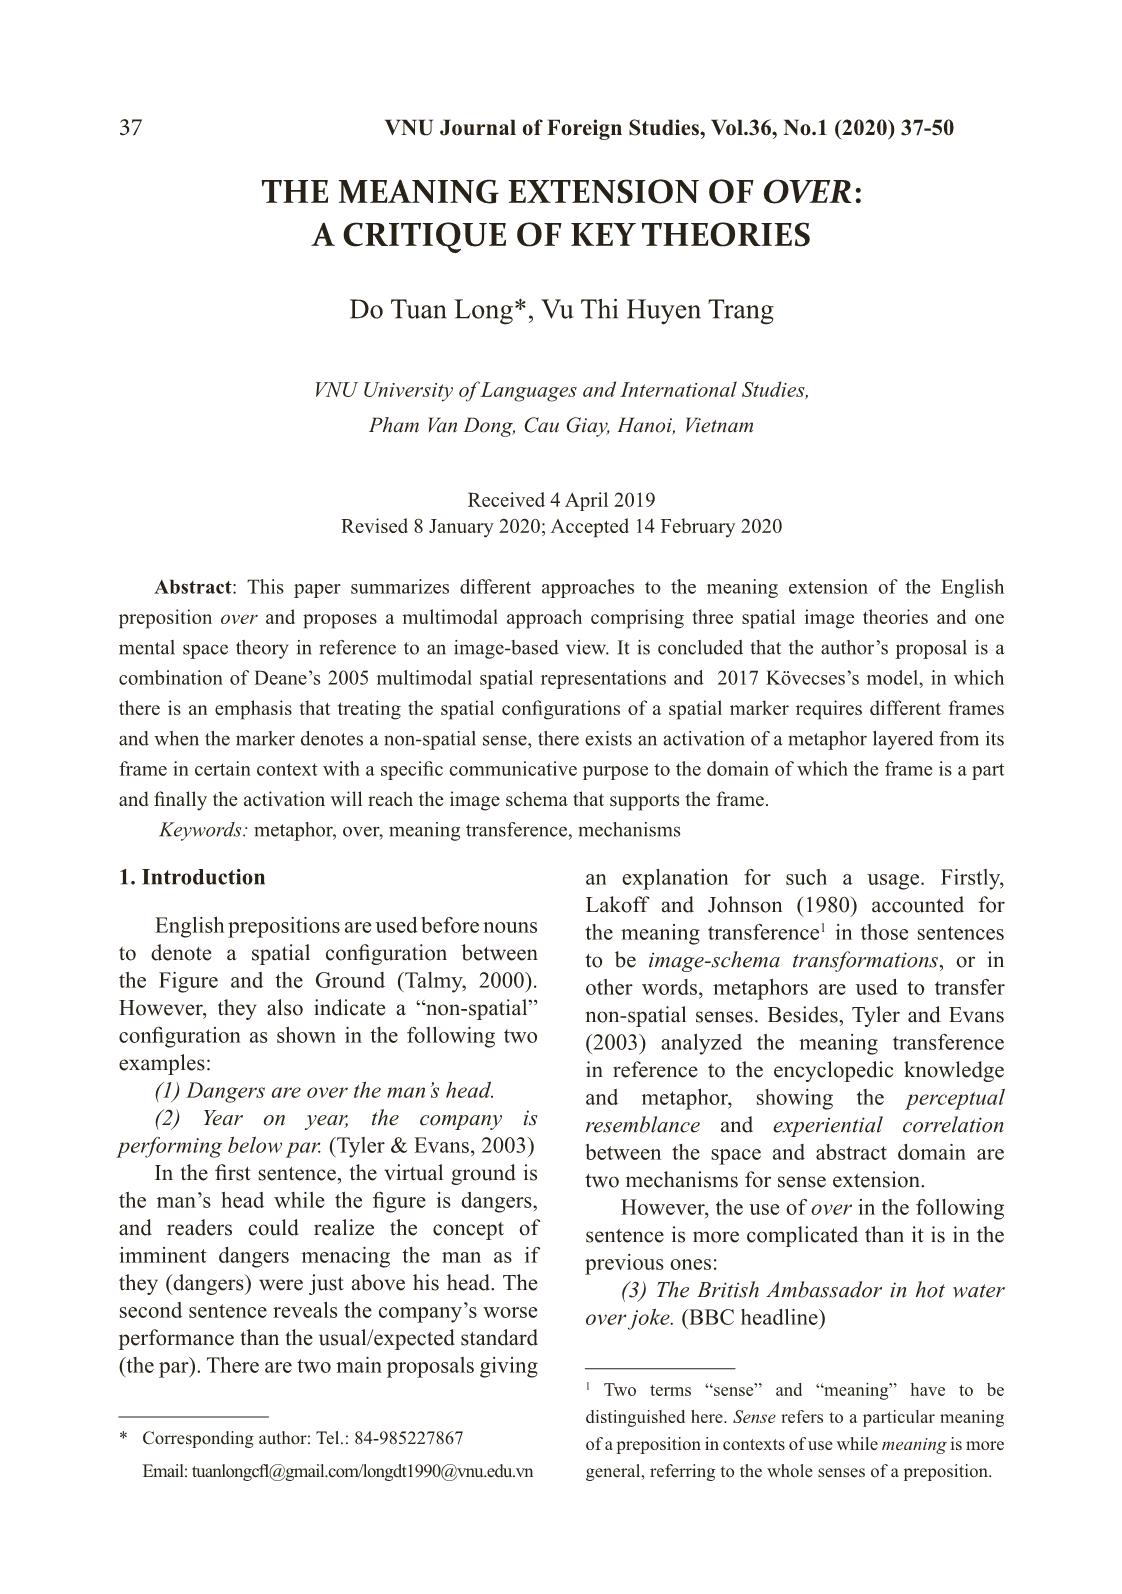 The meaning extension of over: A critique of key theories trang 1